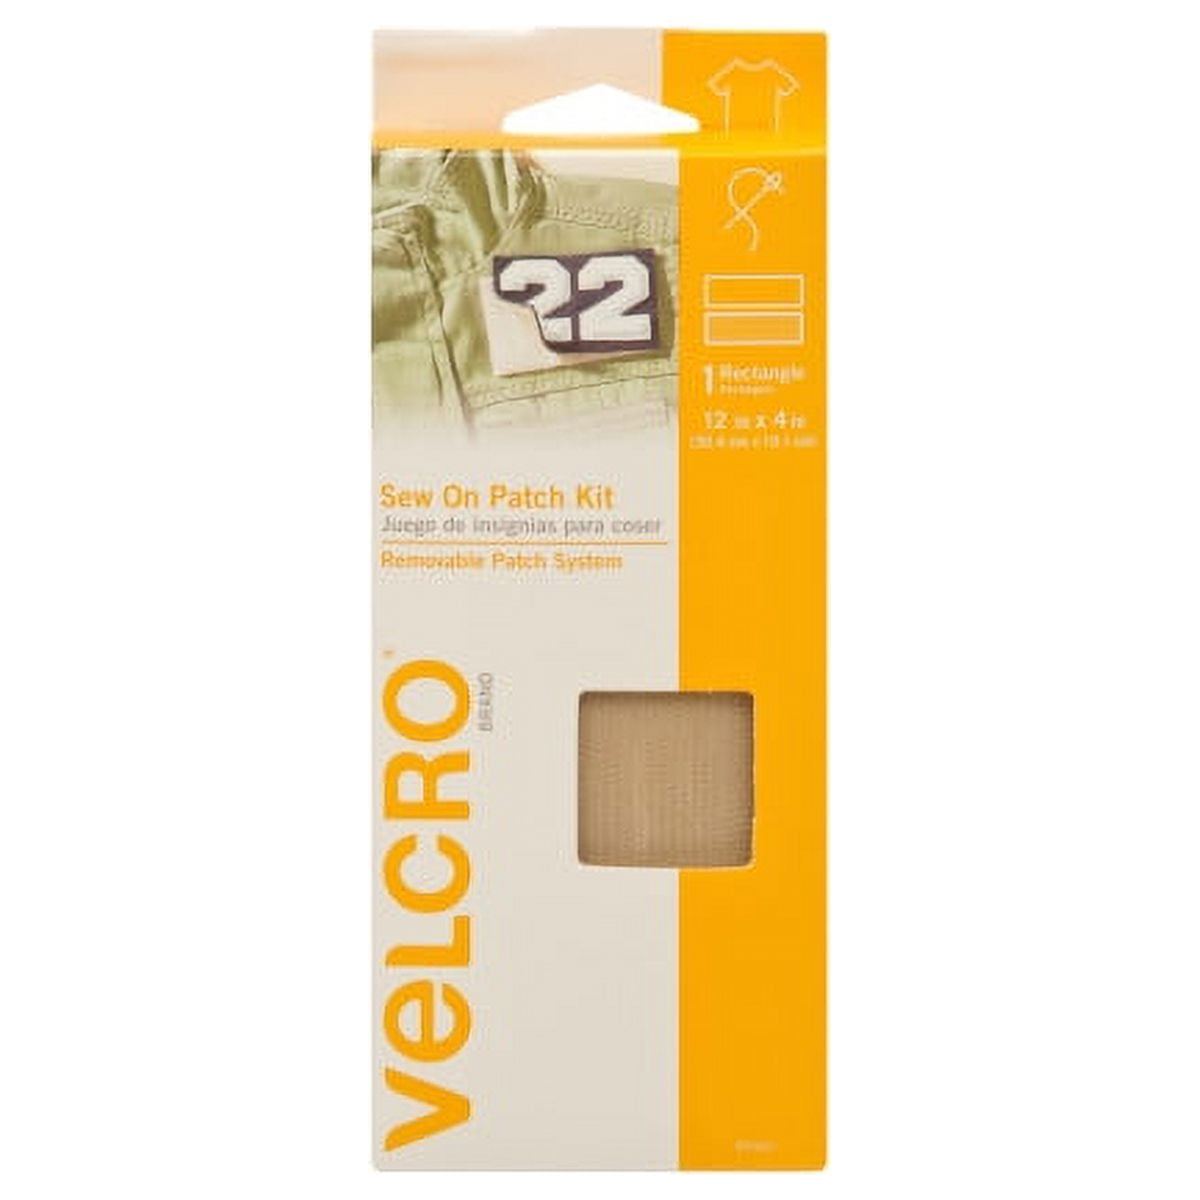 VELCRO Brand ECO Collection Stick On Adhesive Strips 2.5in x 3/4in 30%  Recycled Material, 8 Ct White